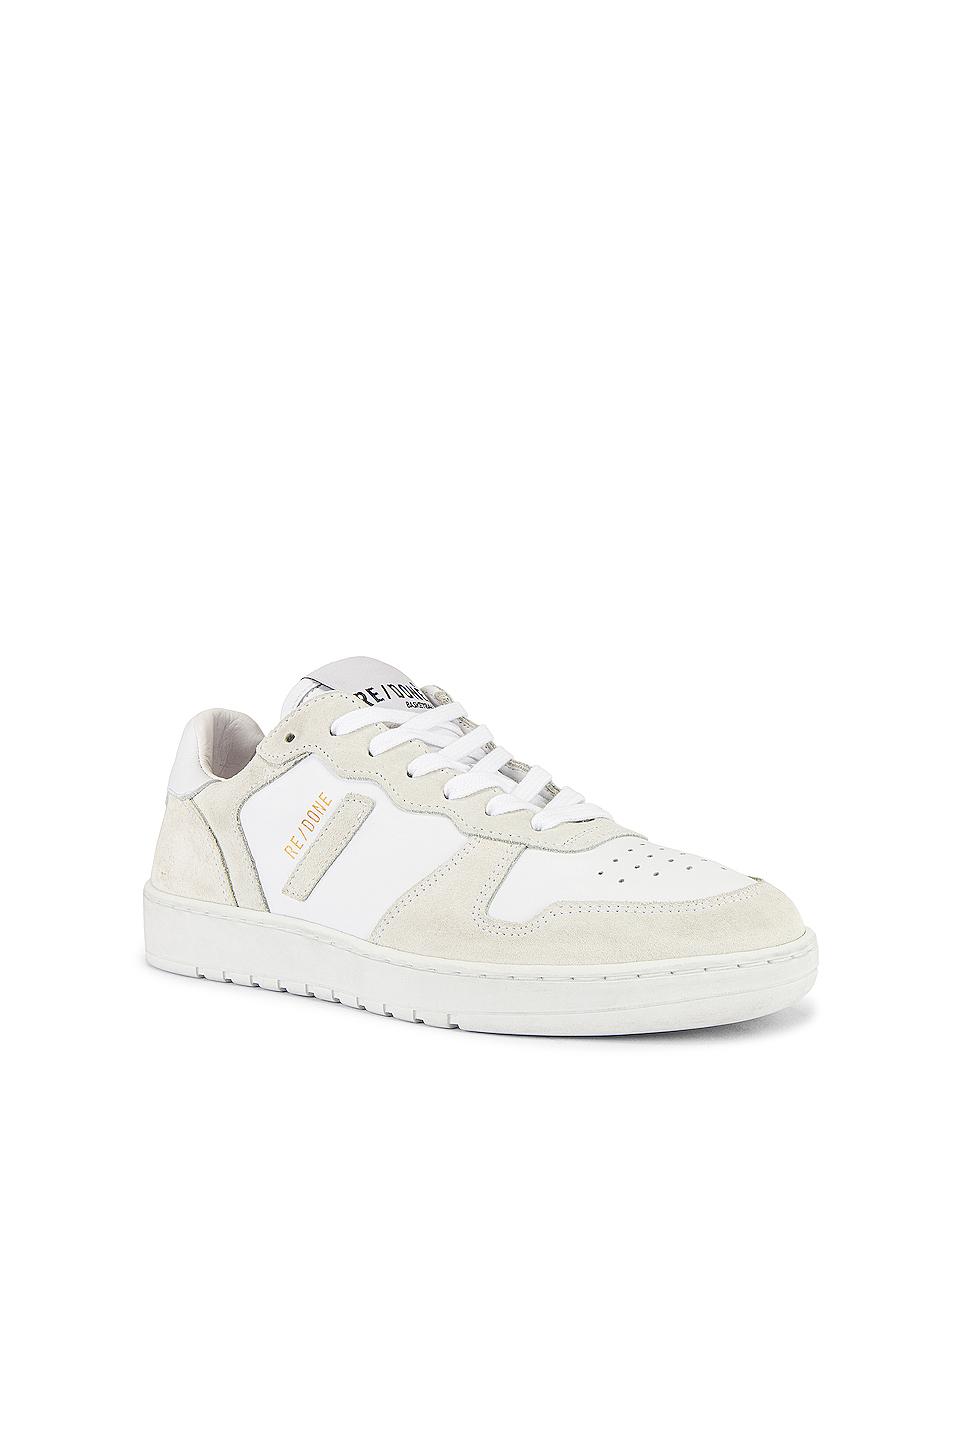 RE/DONE 80s Basketball Shoe in White | Lyst